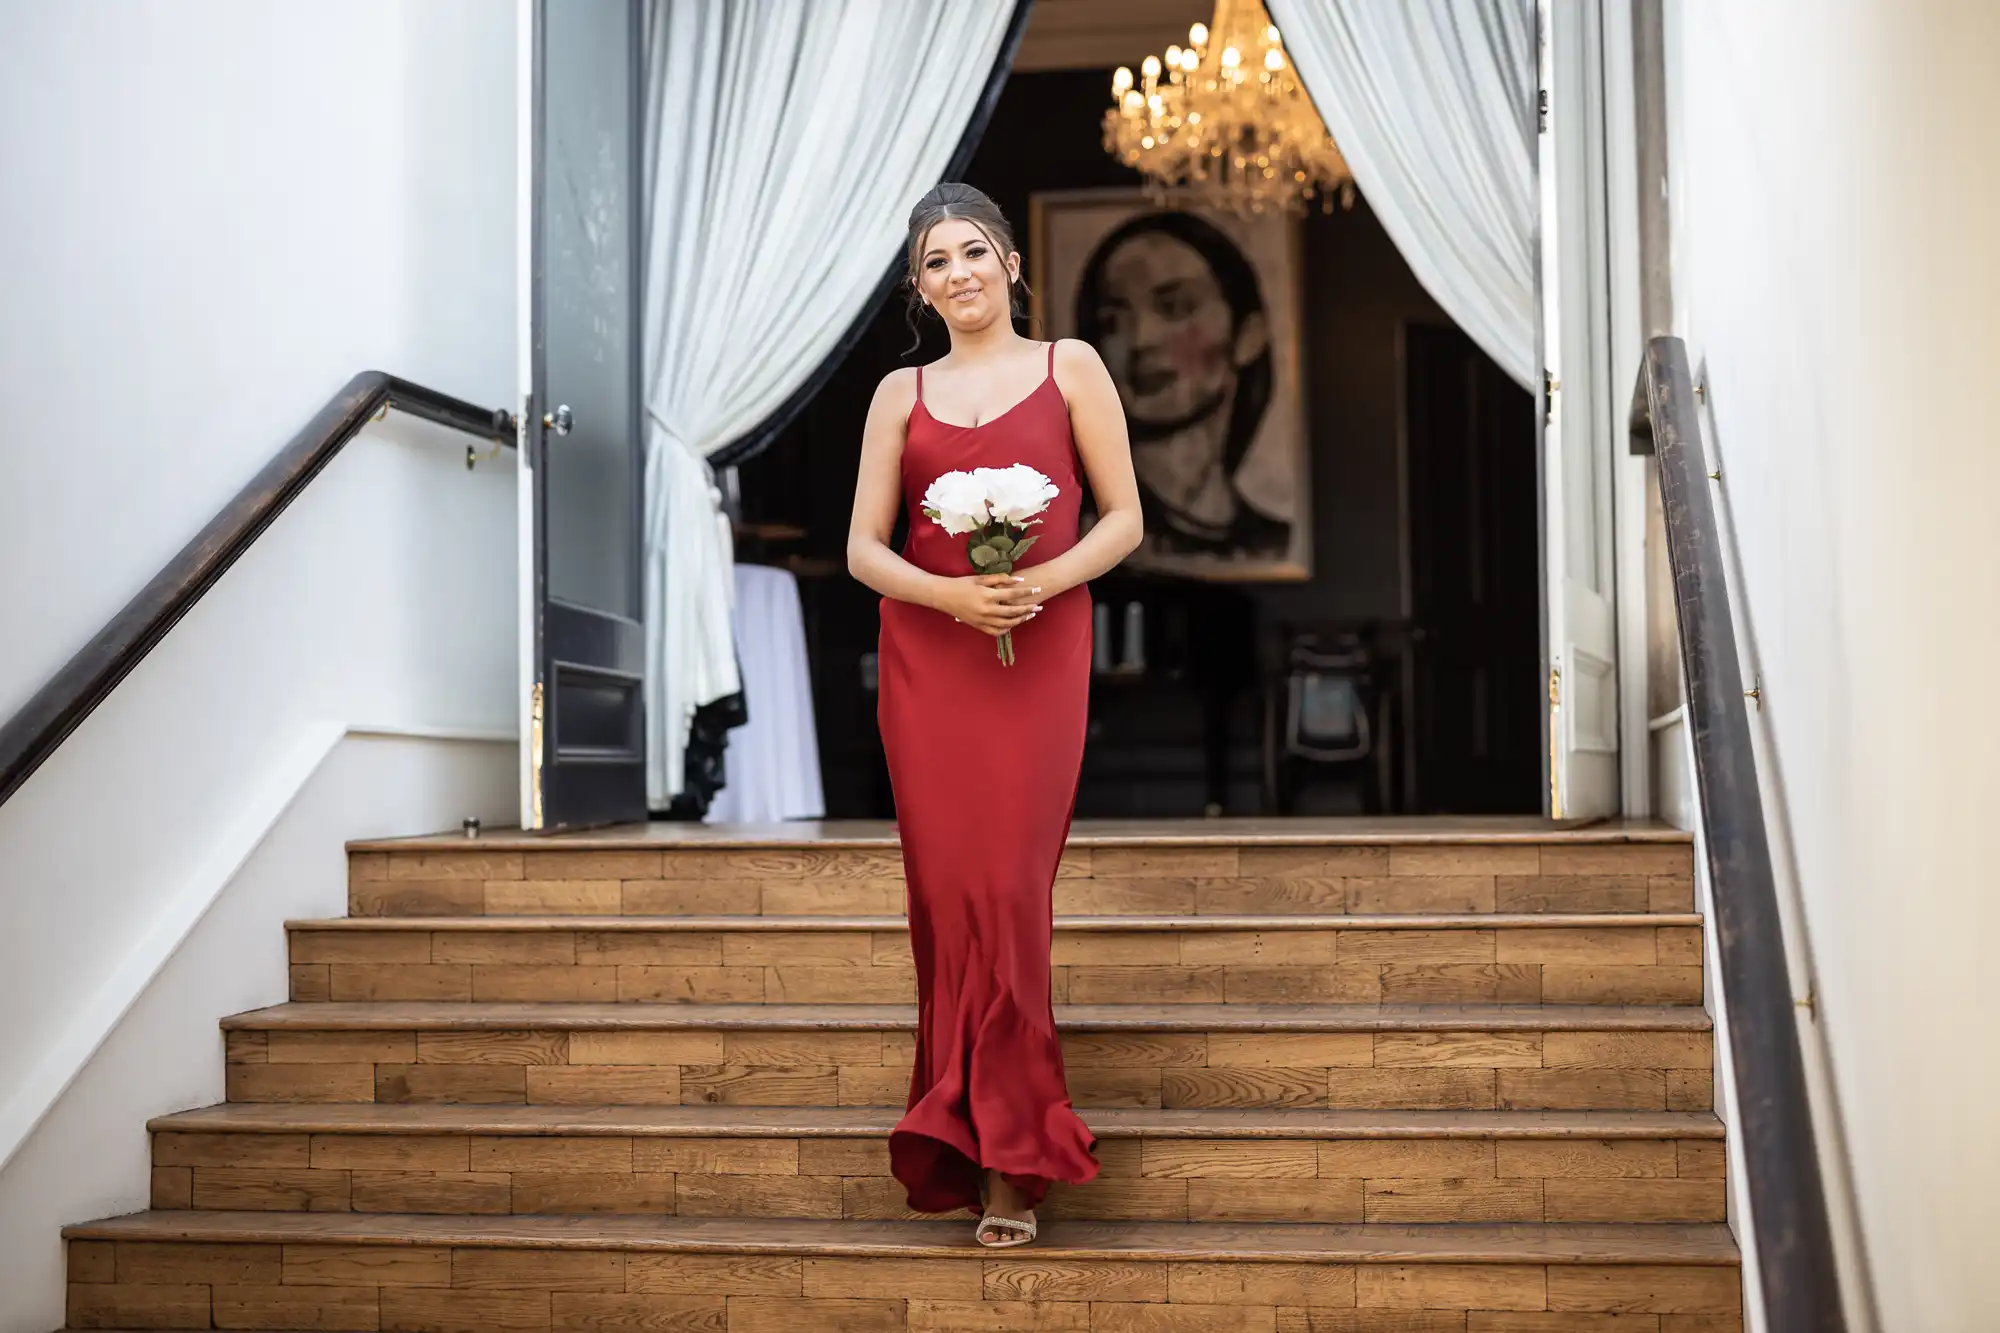 A woman in a red dress holds a bouquet of white flowers while standing on a wooden staircase with a chandelier and large artwork in the background.